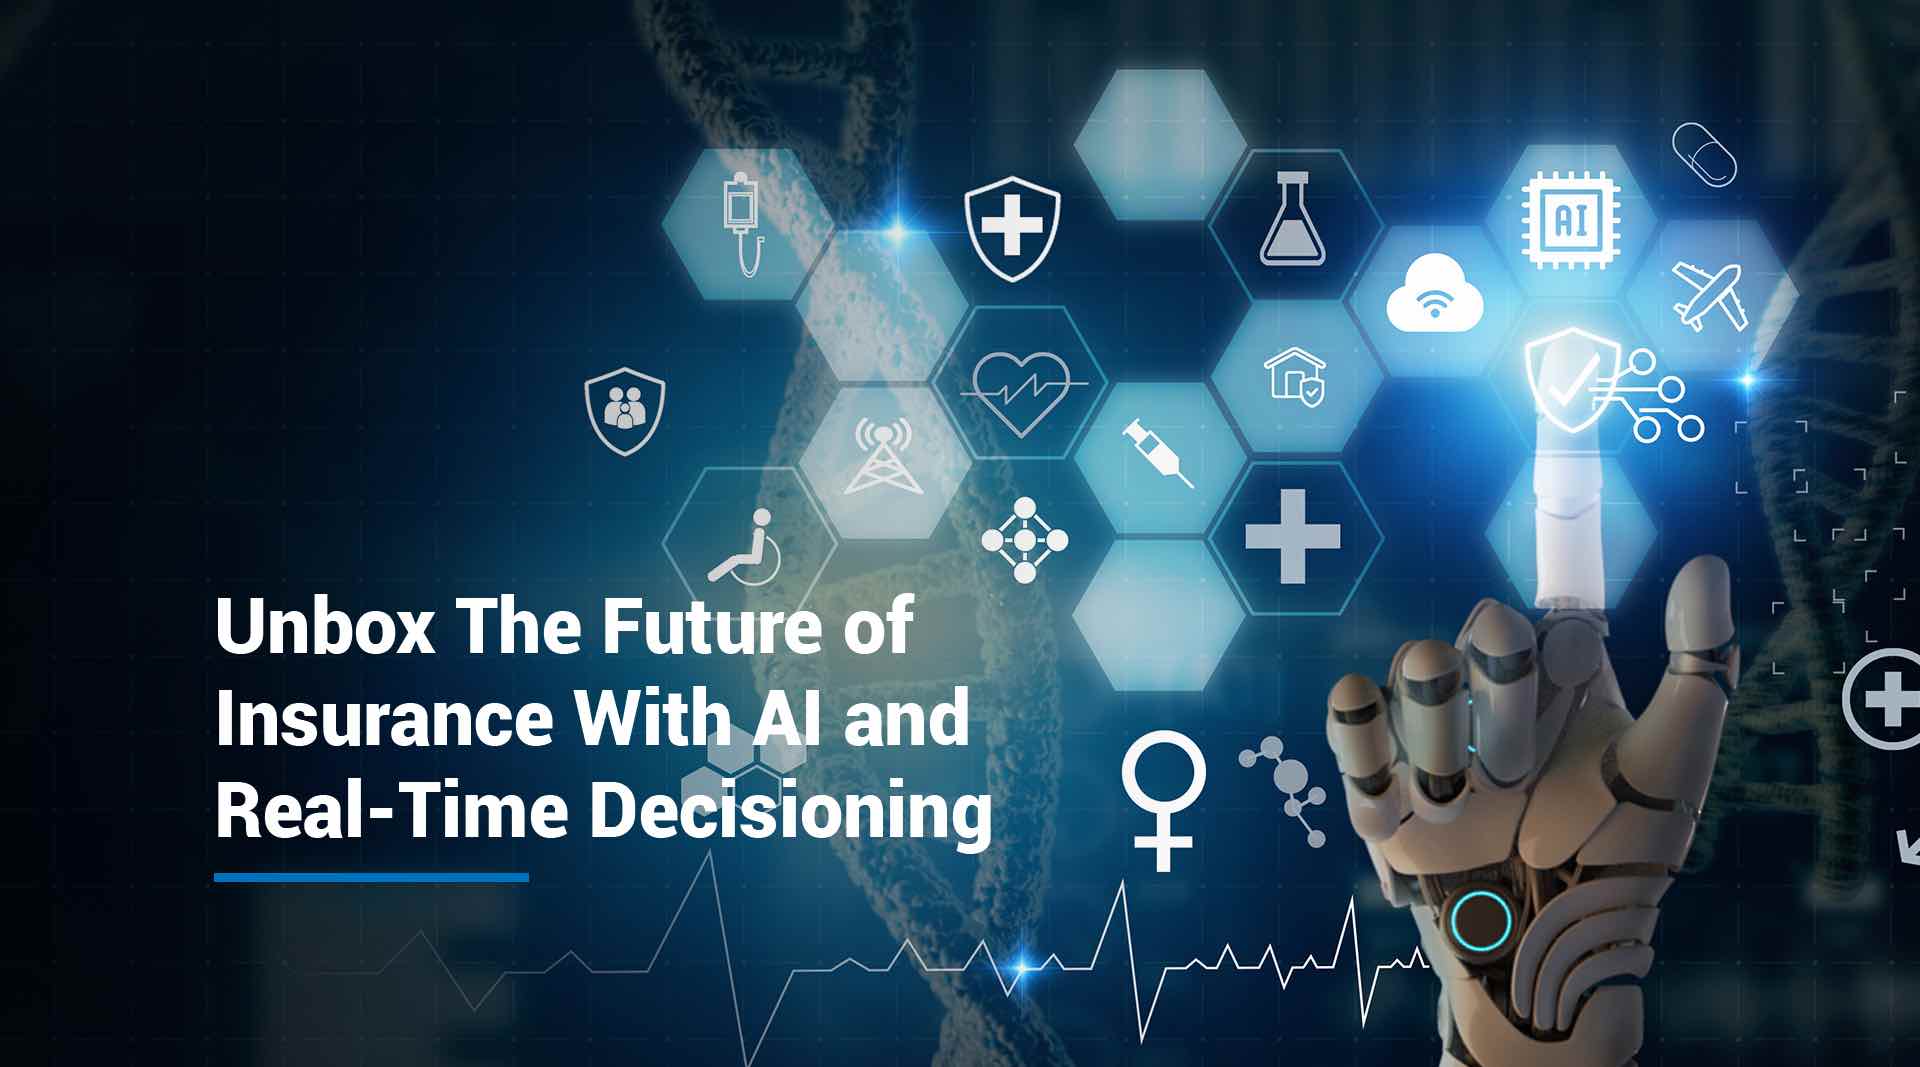 Unbox the future of insurance with AI and real-time decisioning